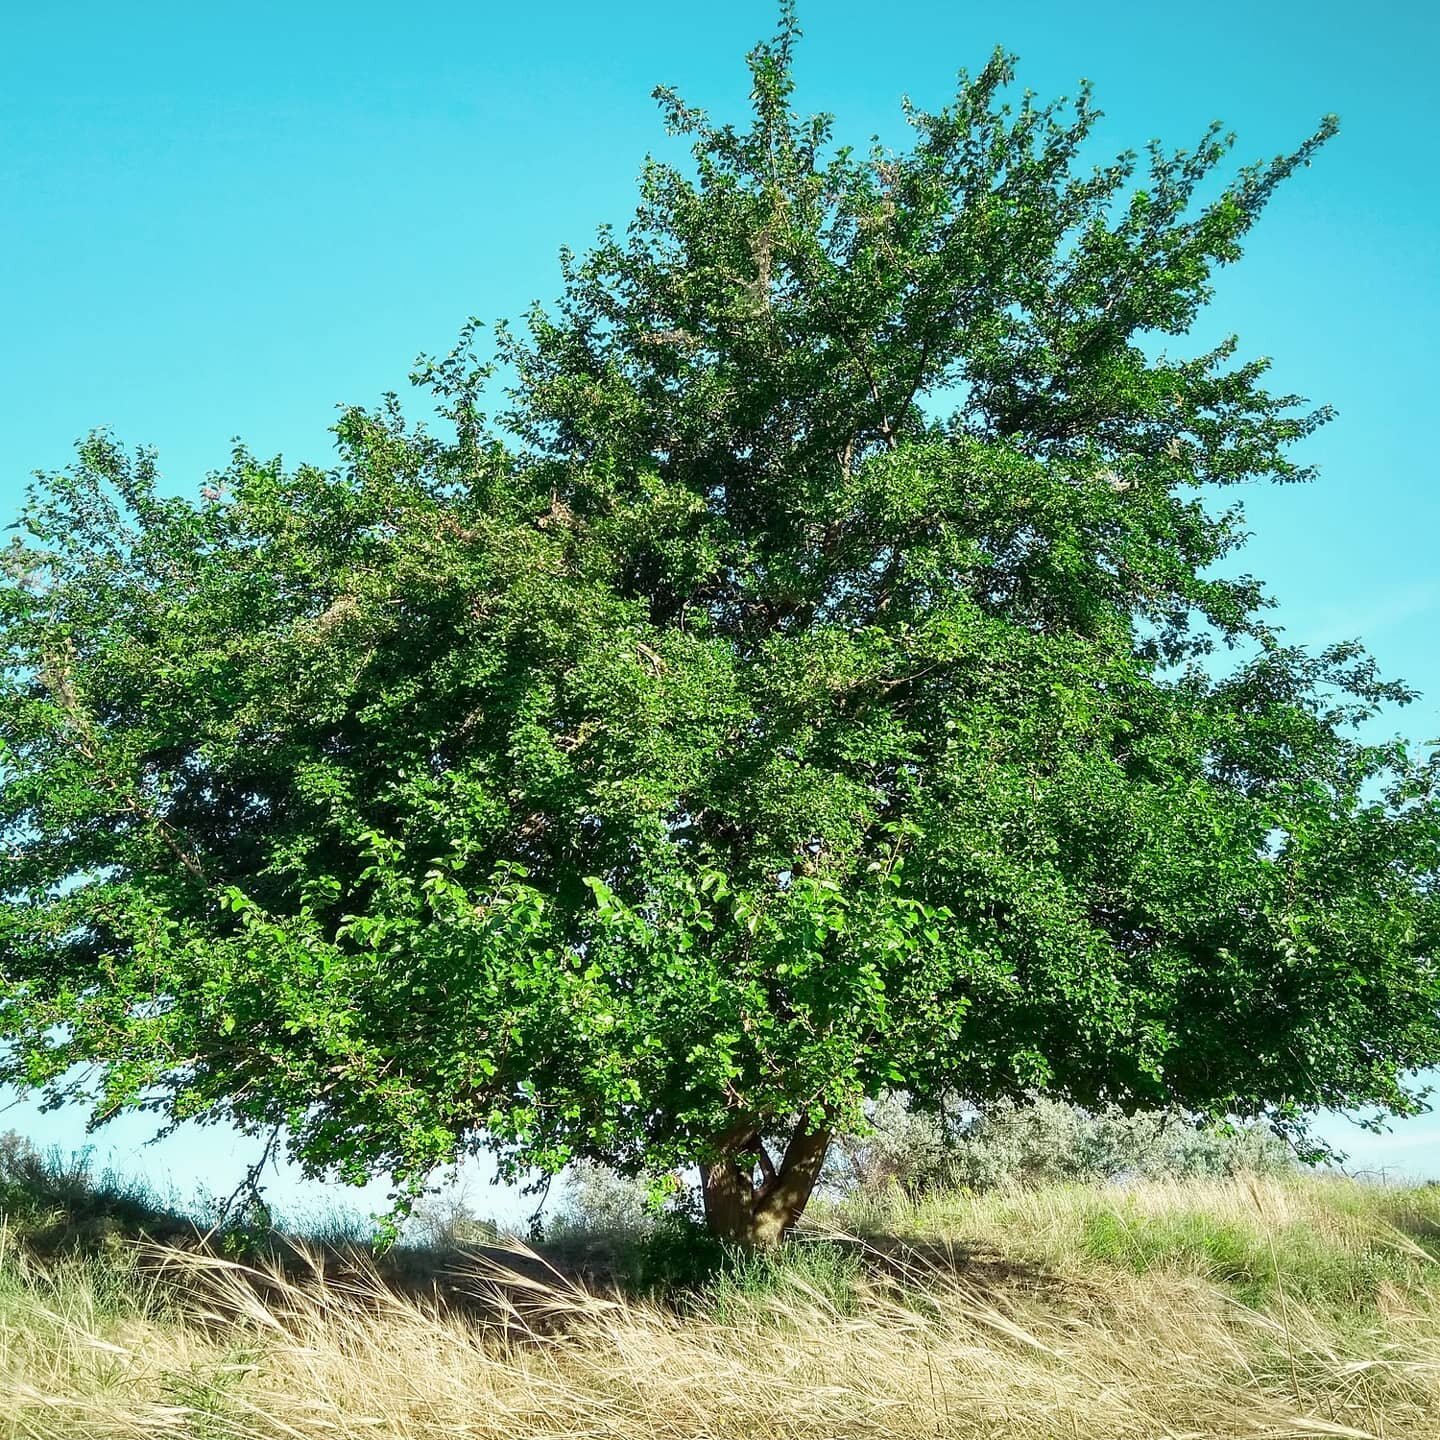 The Oak tree is one of the most loved trees in the world, and with good reason. It's a symbol of strength, morale, resistance and knowledge. ... Oak is often associated with honor, nobility, and wisdom as well, thanks to its size and longevity. Imagi